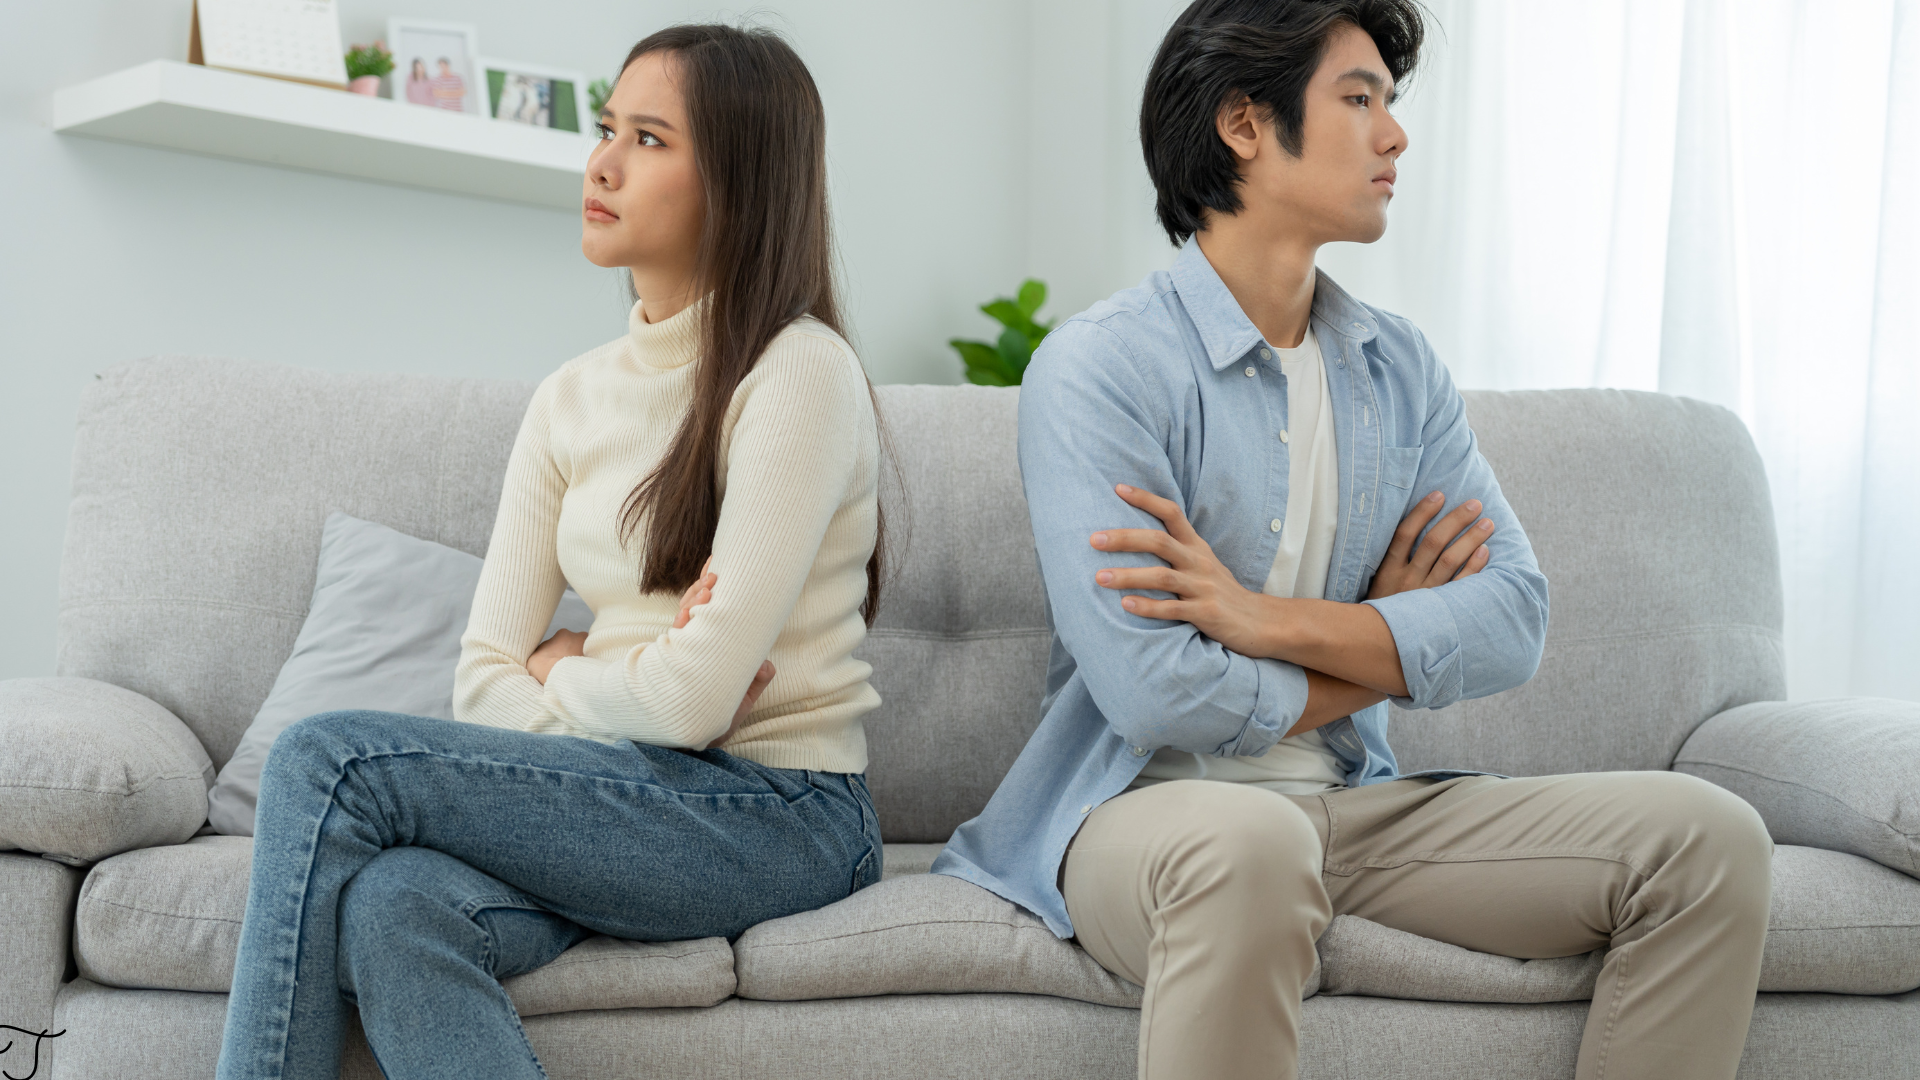 5 Signs That a Relationship is Coming to a Close by Dr. Natalie Candela of Awakened Hypnosis.